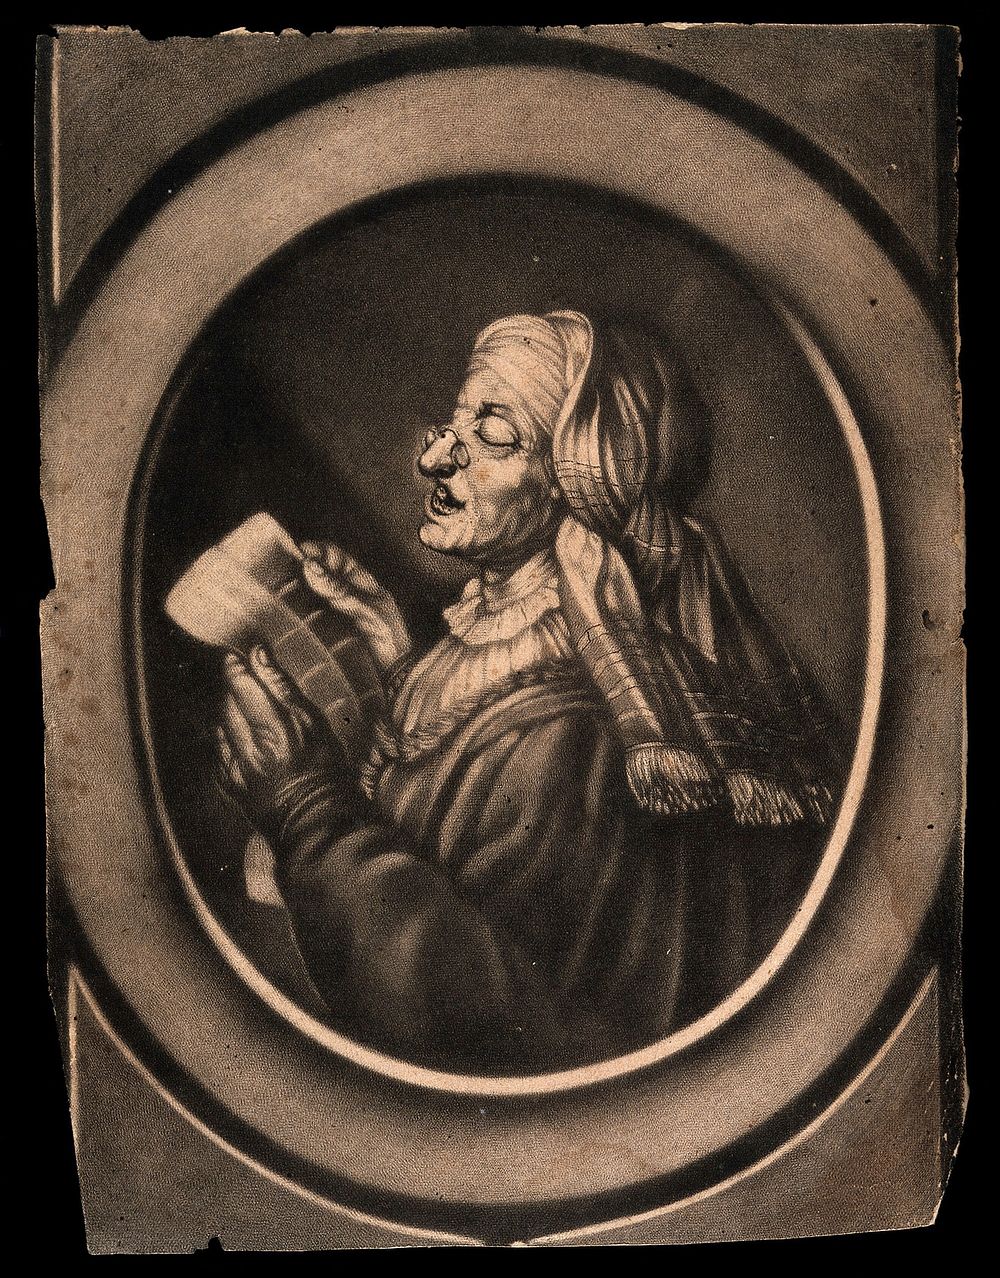 An old woman wearing spectacles, reading the paper. Mezzotint.